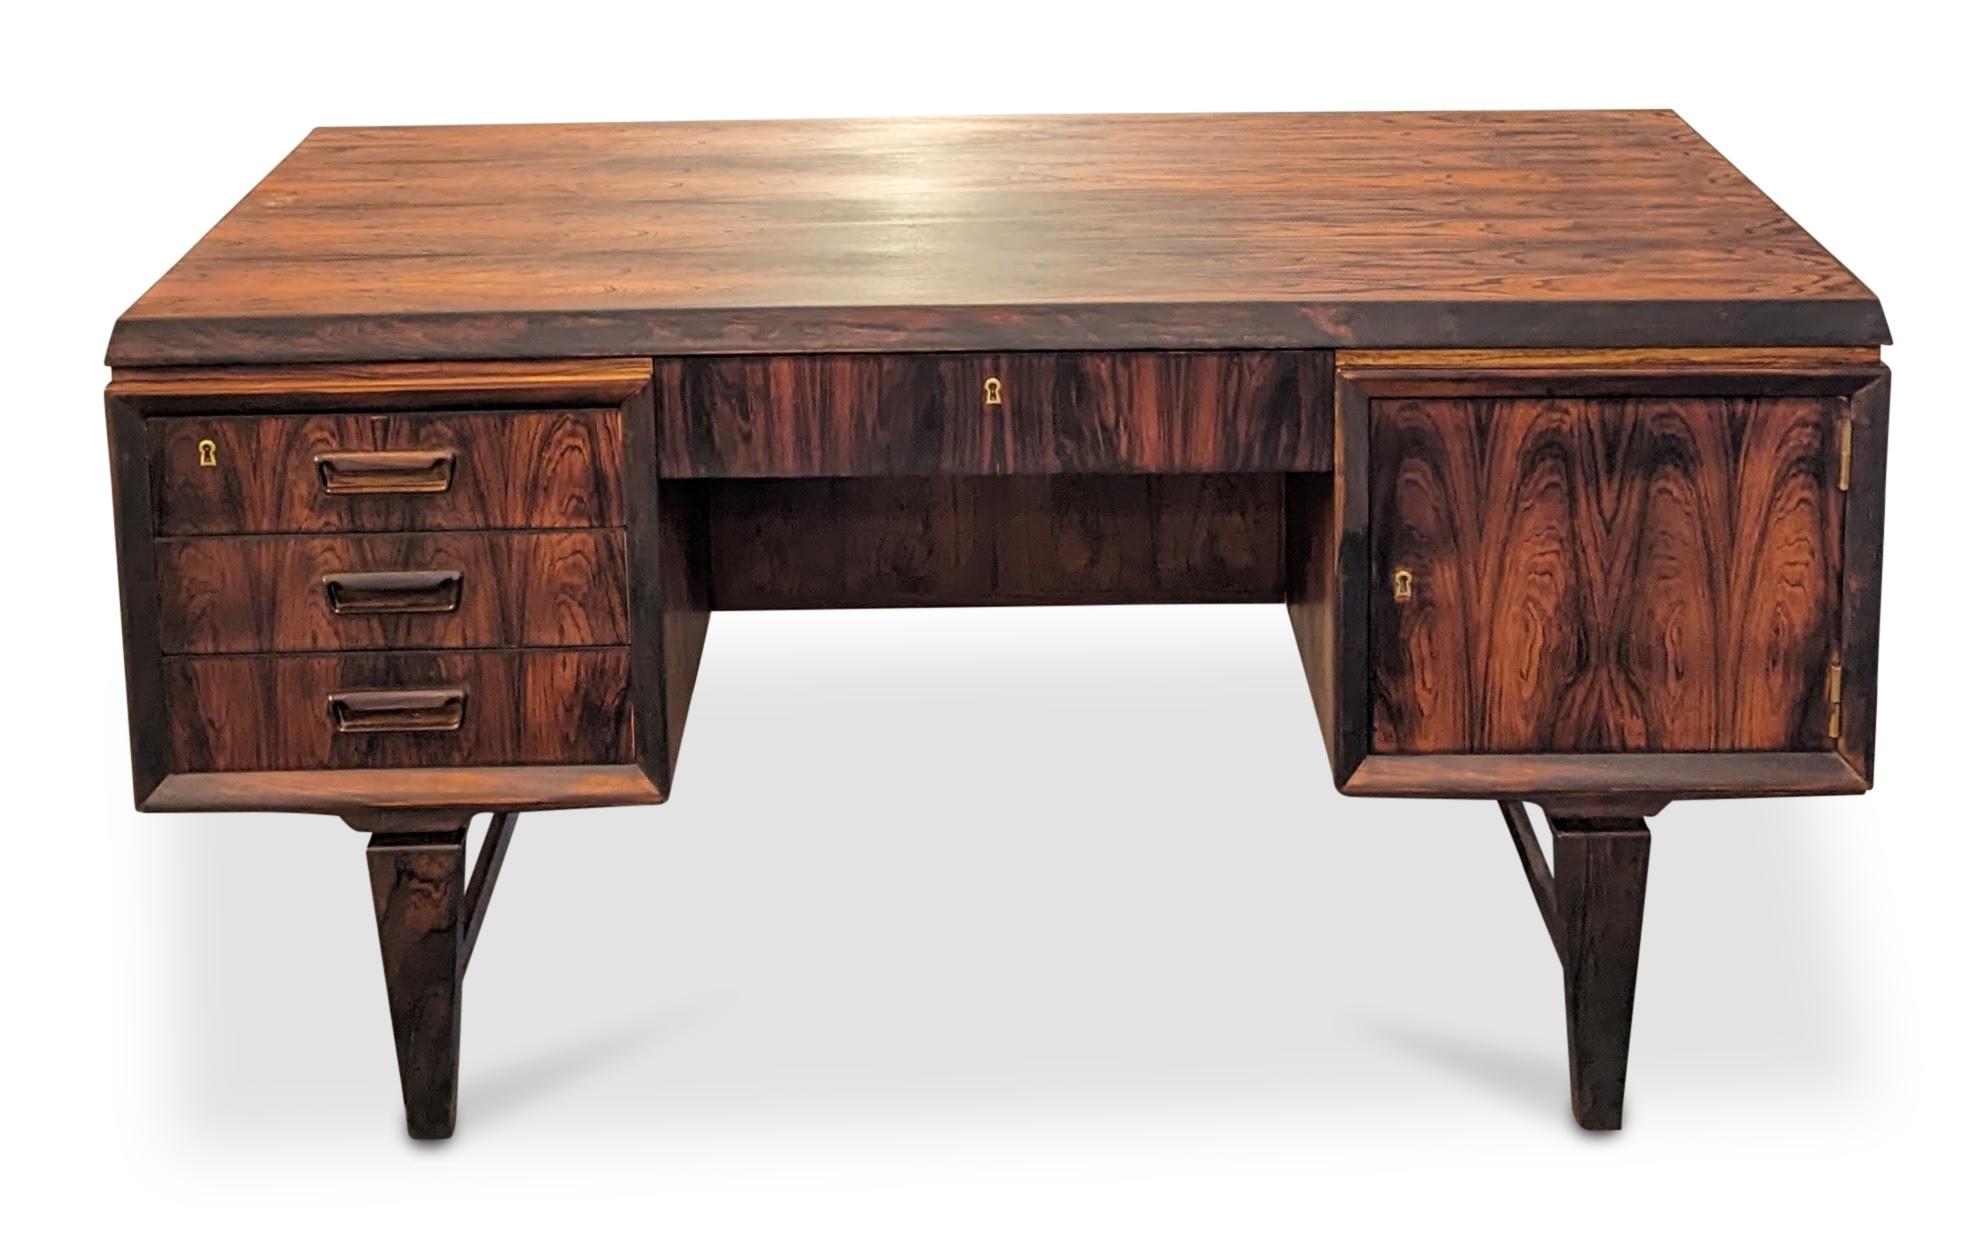 Vintage Danish Mid Century Large Rosewood Desk - 072315 In Good Condition For Sale In Jersey City, NJ